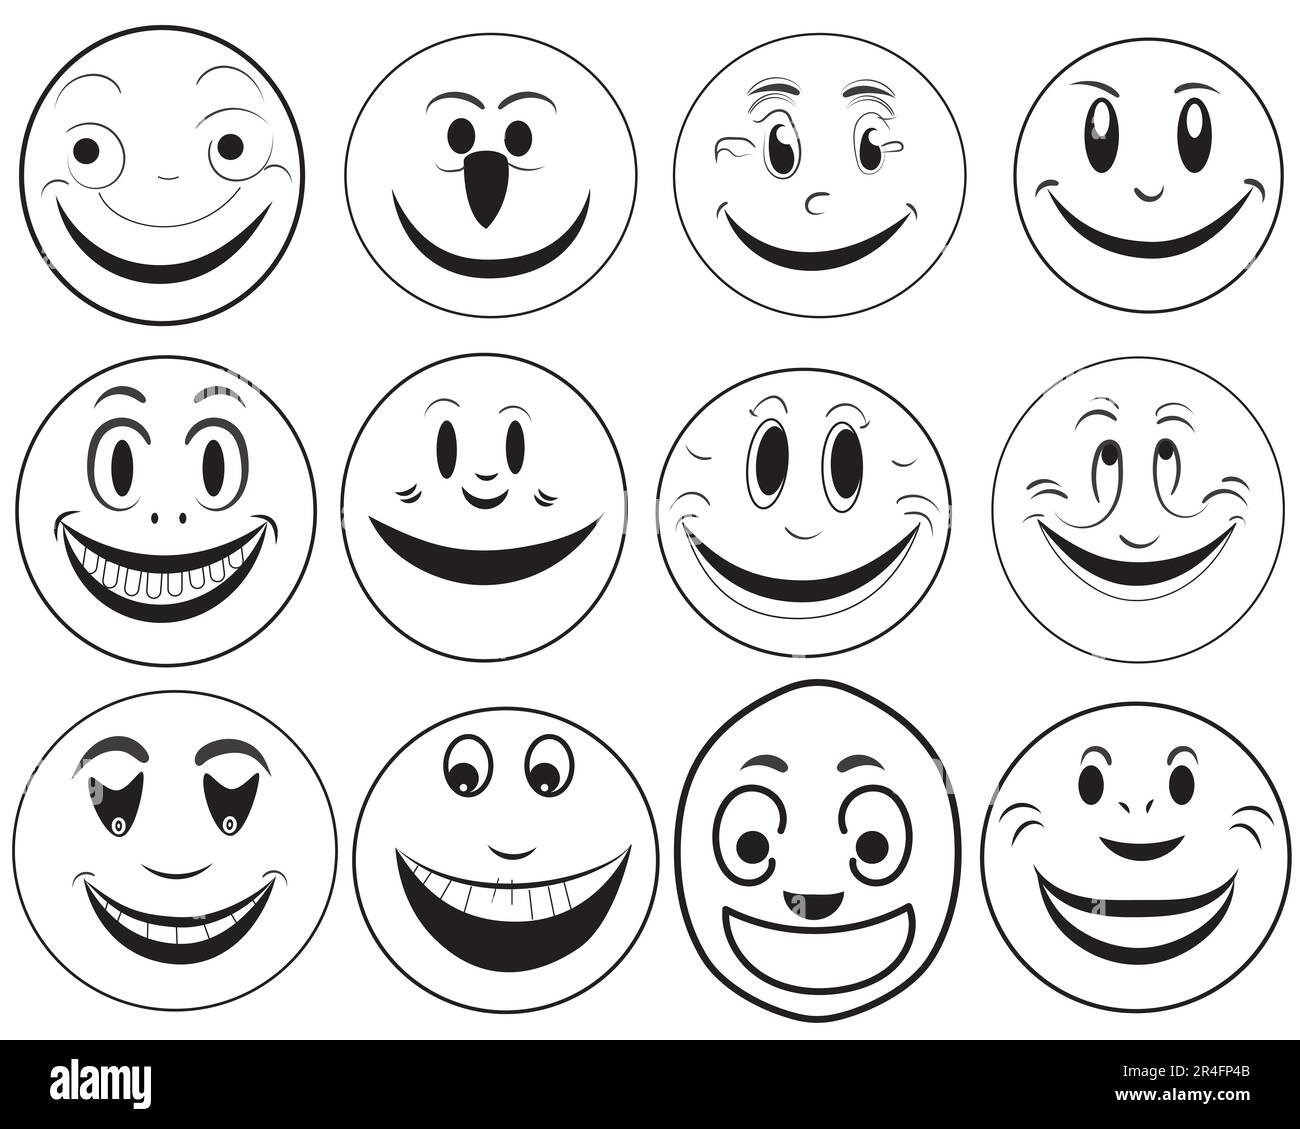 a set of emoji doodle icons that depict various emotions and moods, such as happiness, sadness, smiling, and humor, in the form of emoji faces Stock Photo